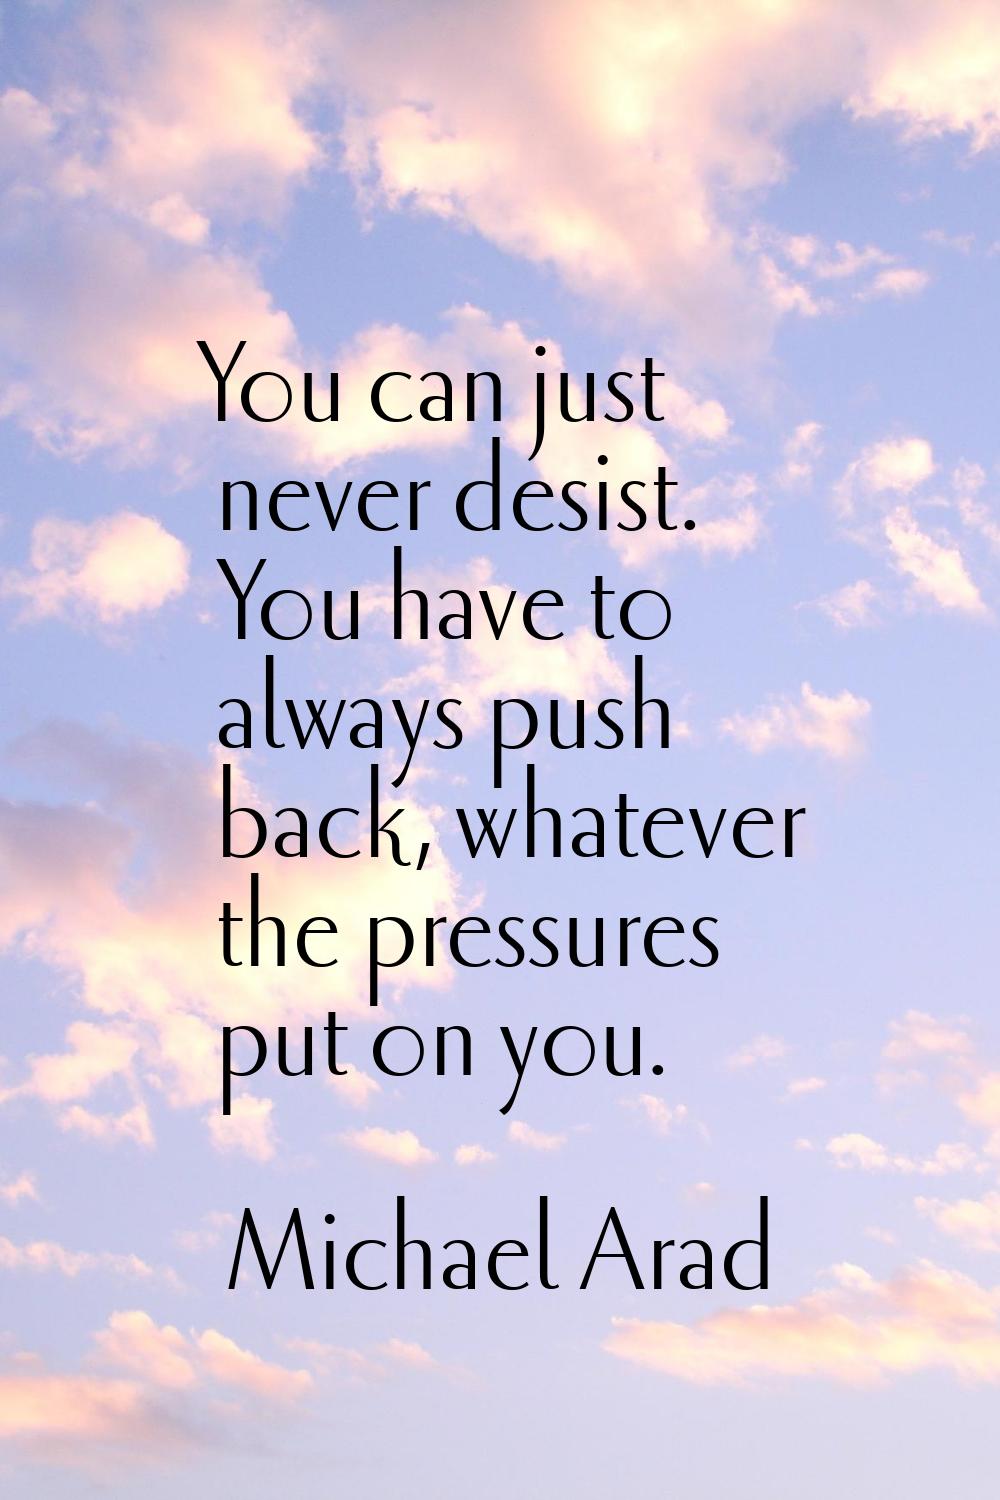 You can just never desist. You have to always push back, whatever the pressures put on you.